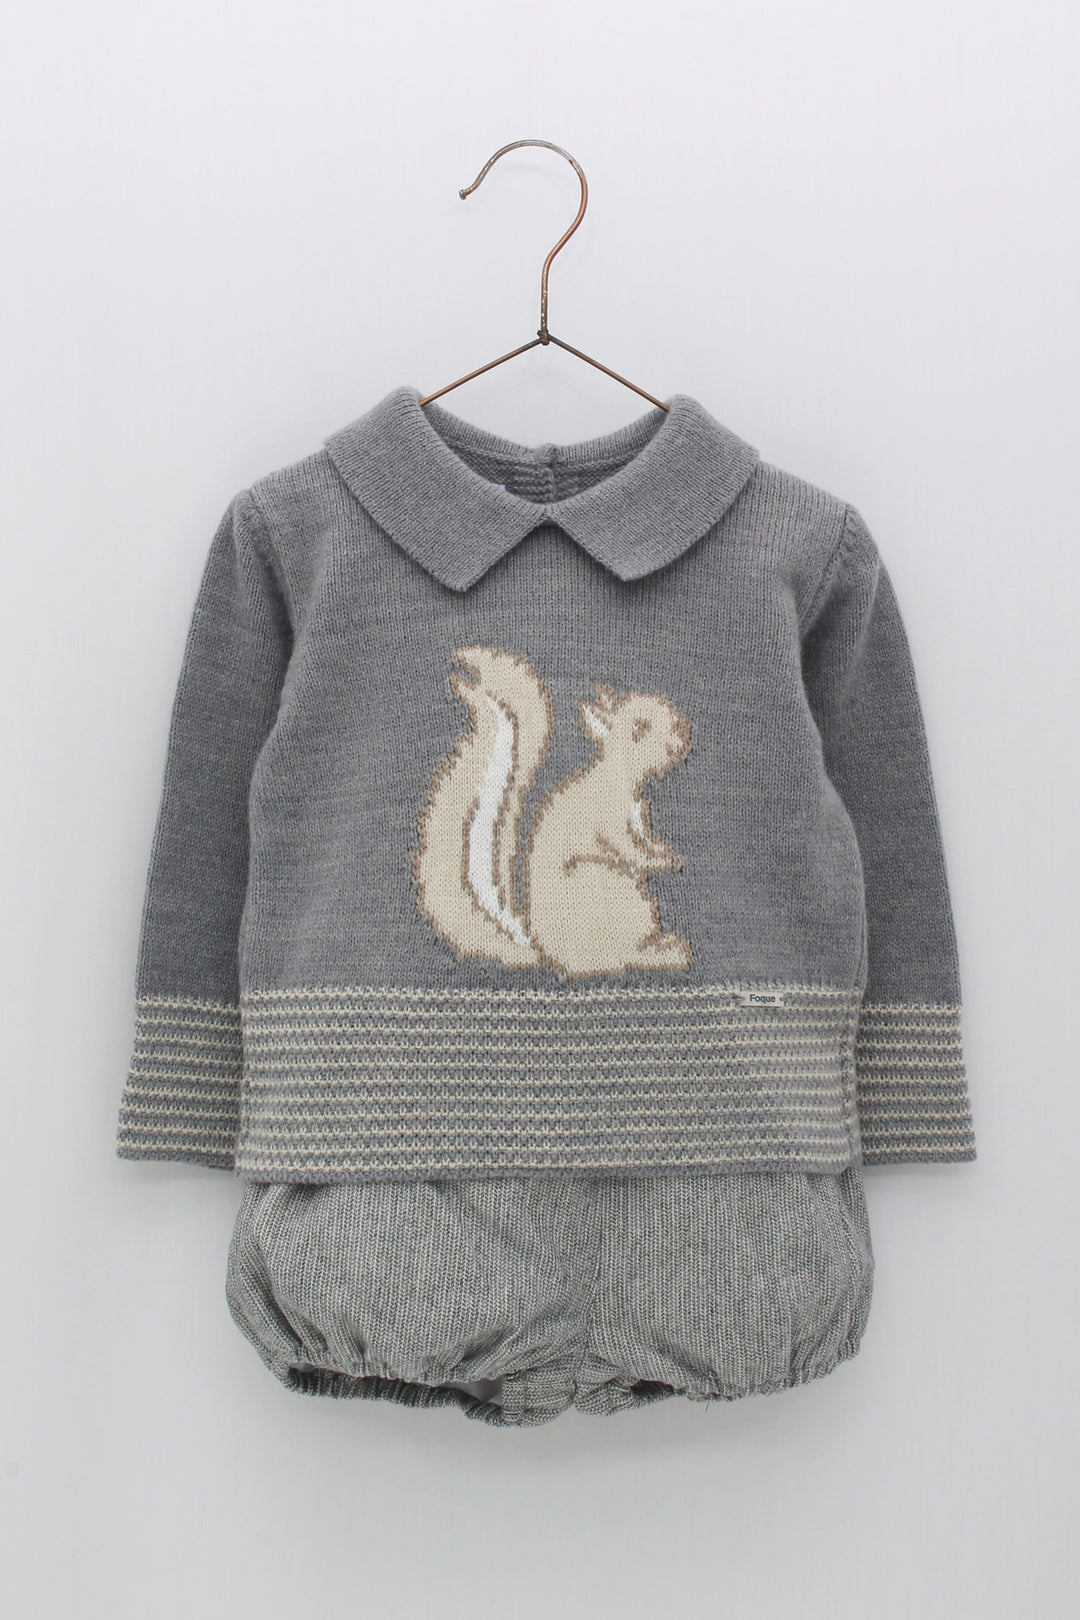 Foque PREORDER "Cecil" Grey Knit Squirrel Top & Jam Pants | Millie and John